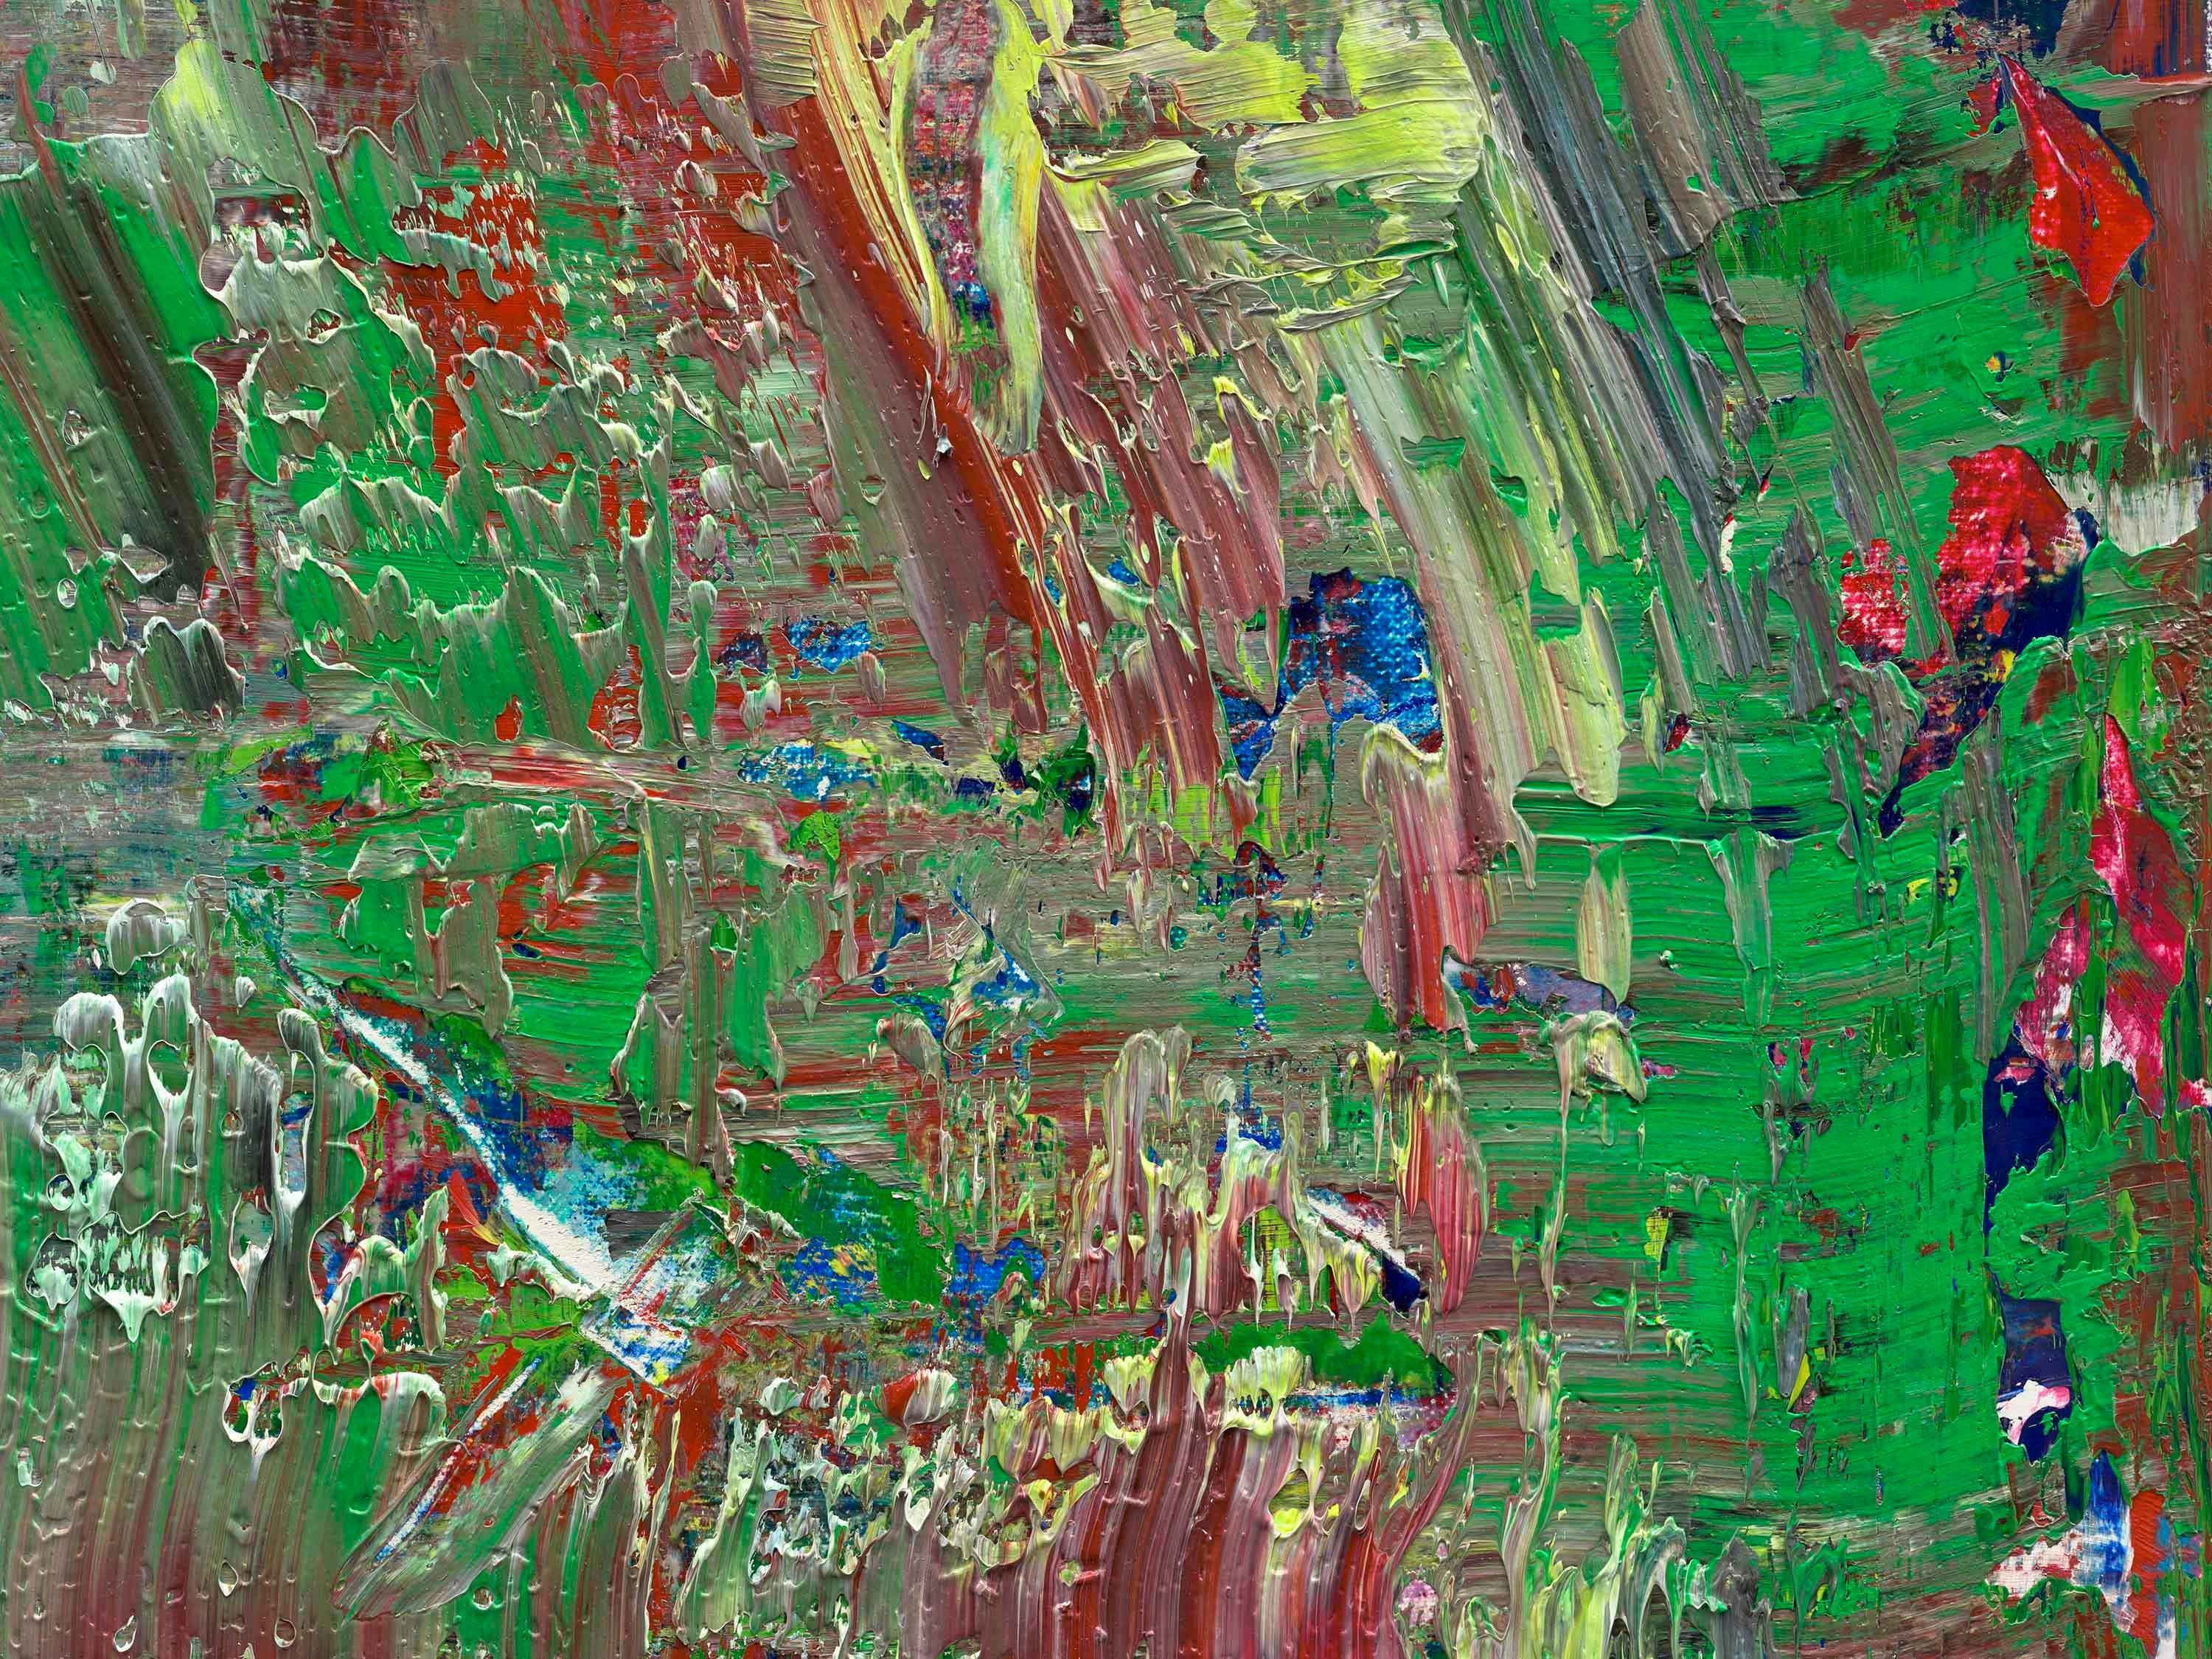 A detail from a painting by Gerhard Richter, titled Abstraktes Bild (Abstract Painting), dated 2016.